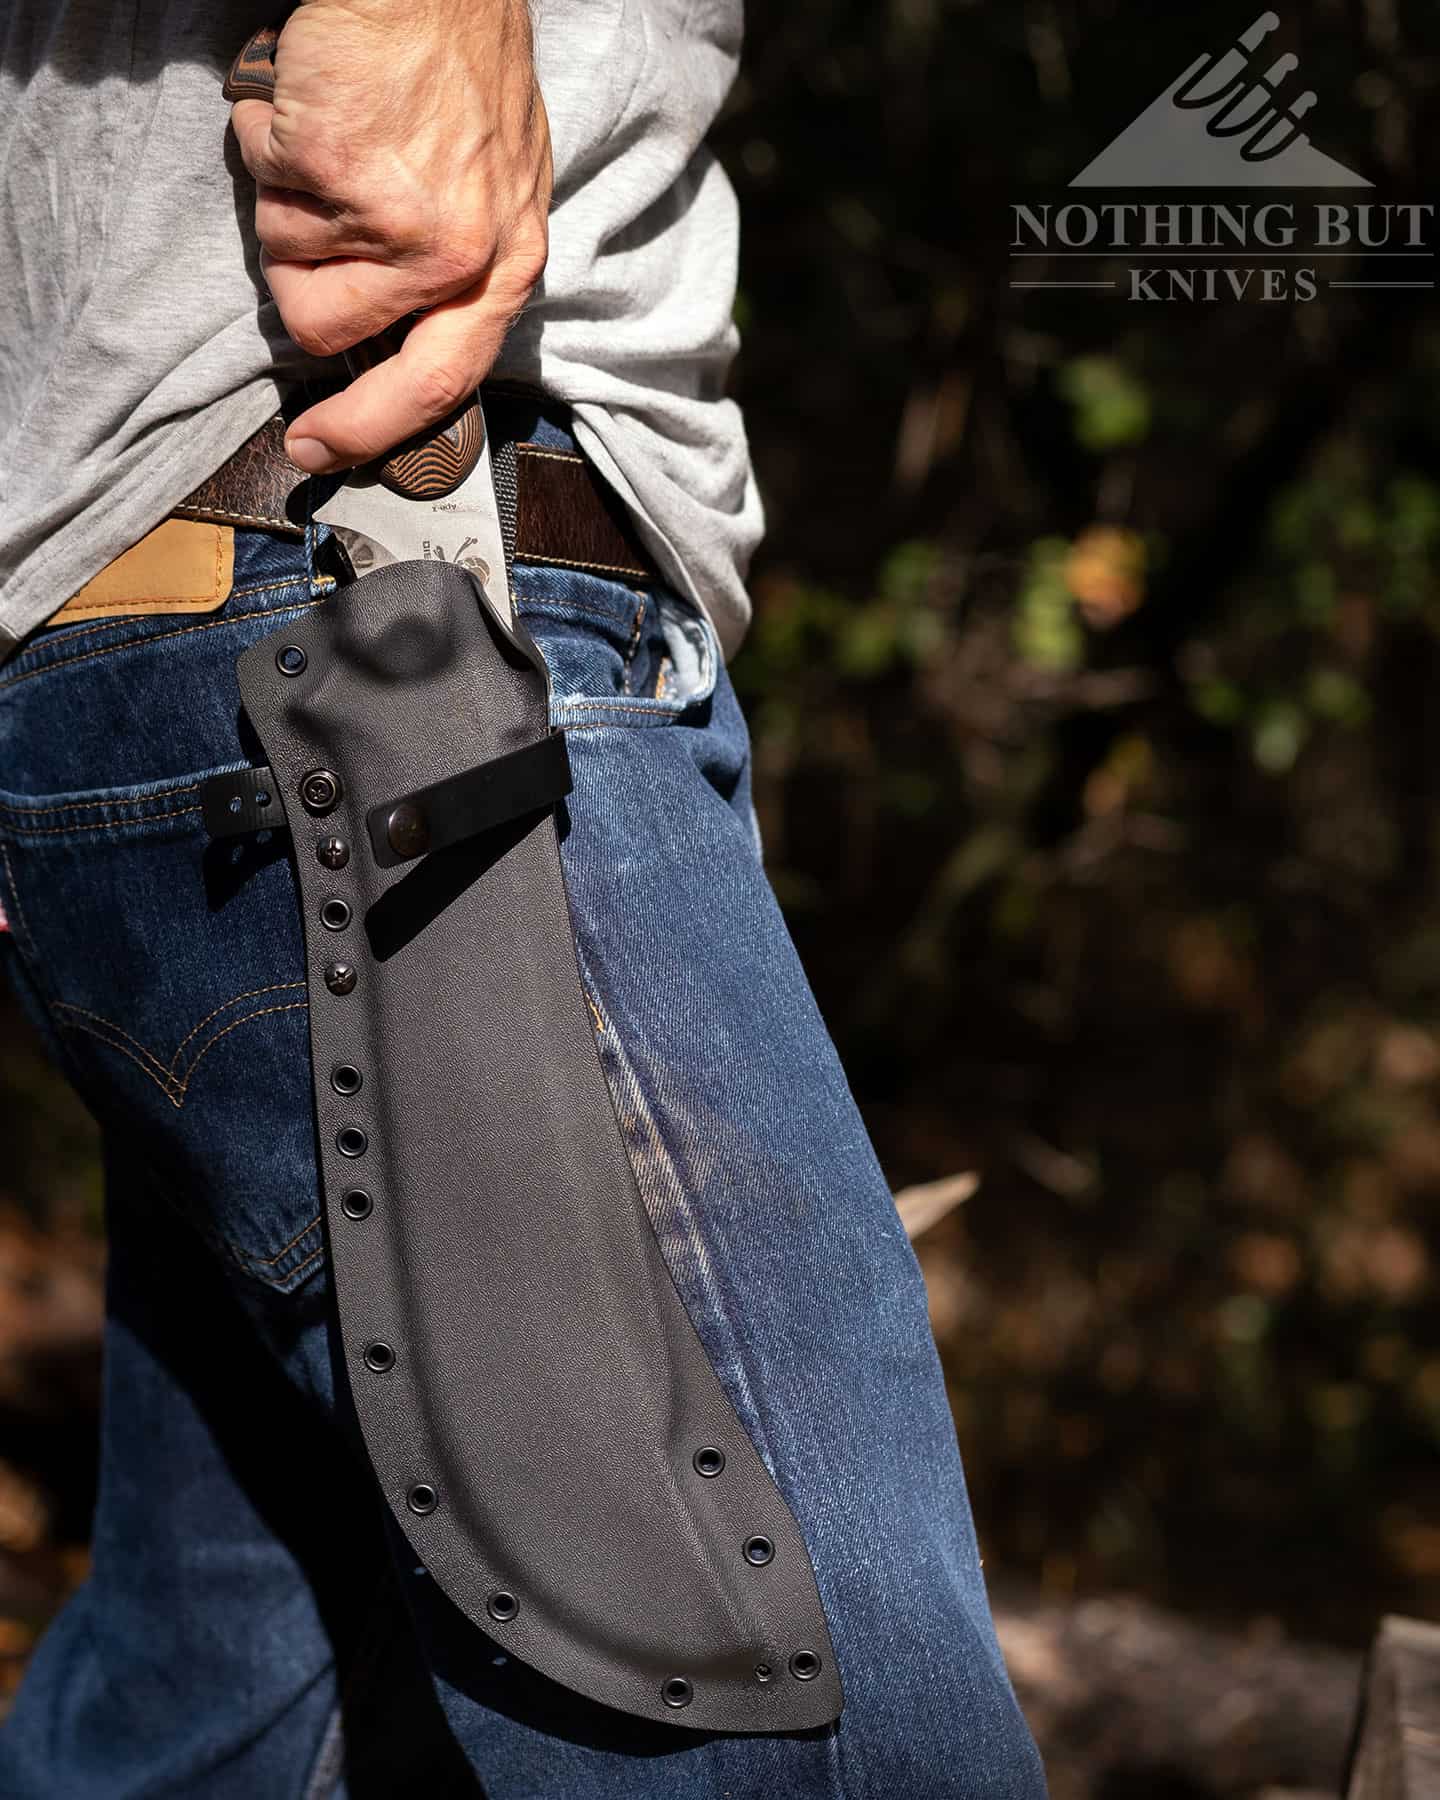 The sheath of the Work Tuff Apex knife sits low on the hip which makes it easy to draw in-spite of its size.  